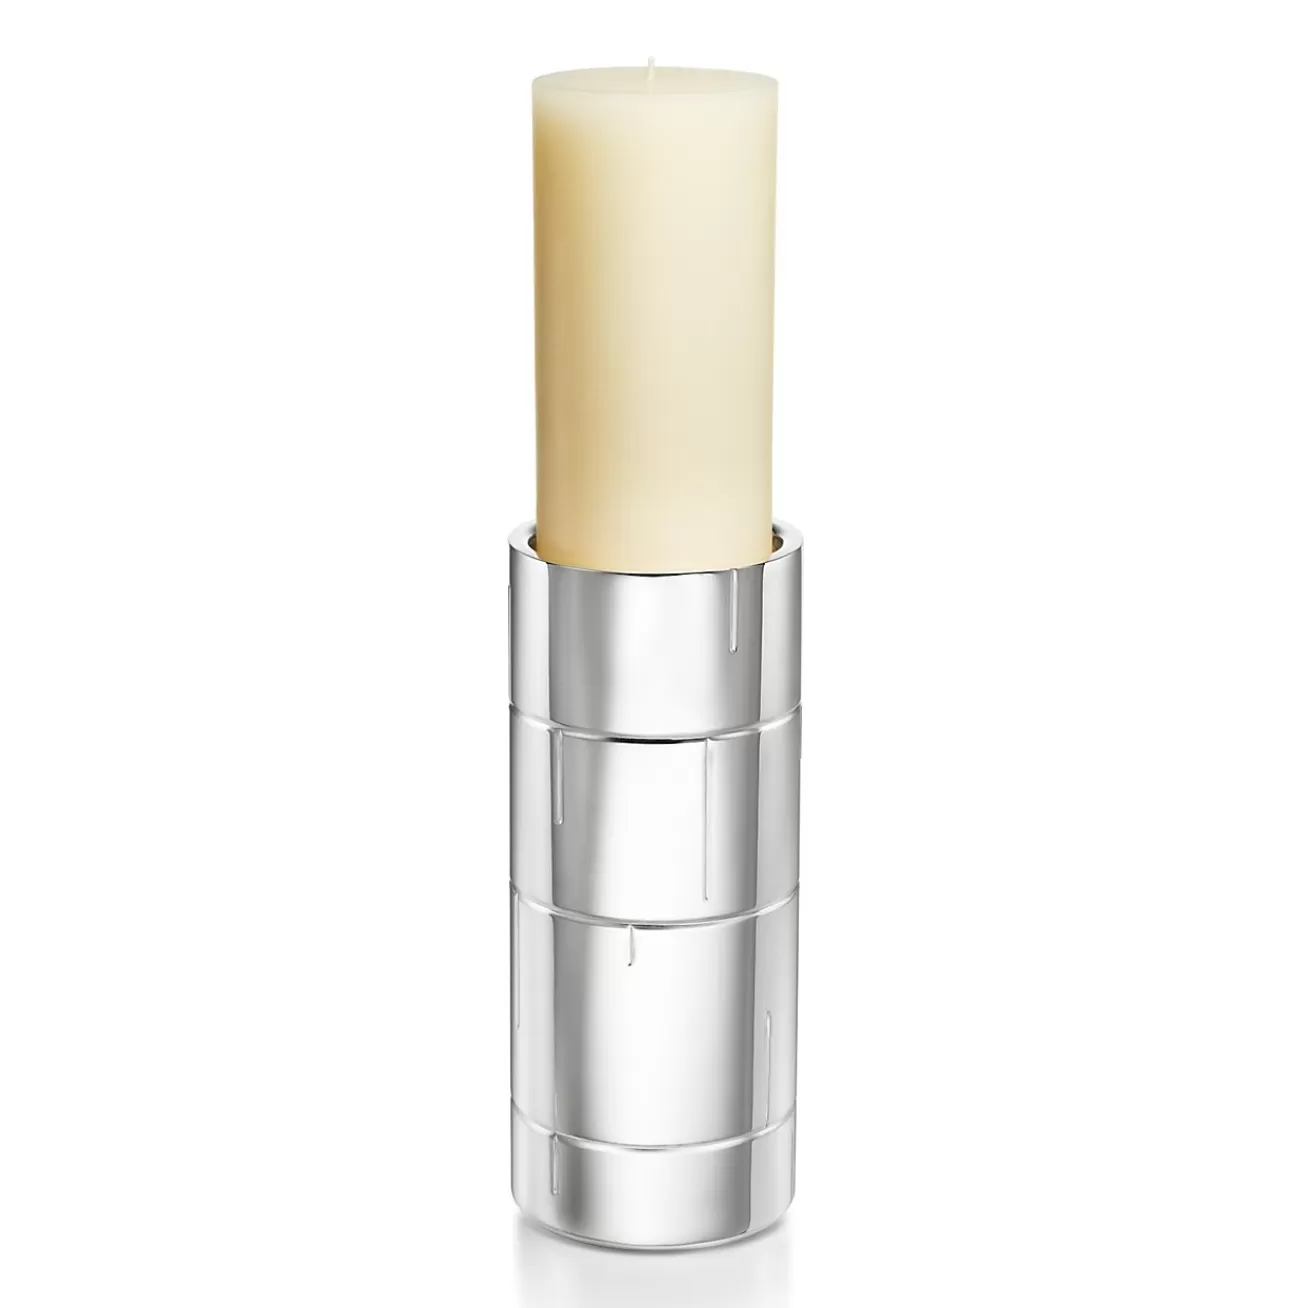 Tiffany & Co. Modern Bamboo Pillar Candleholder in Sterling Silver | ^ The Home | Housewarming Gifts